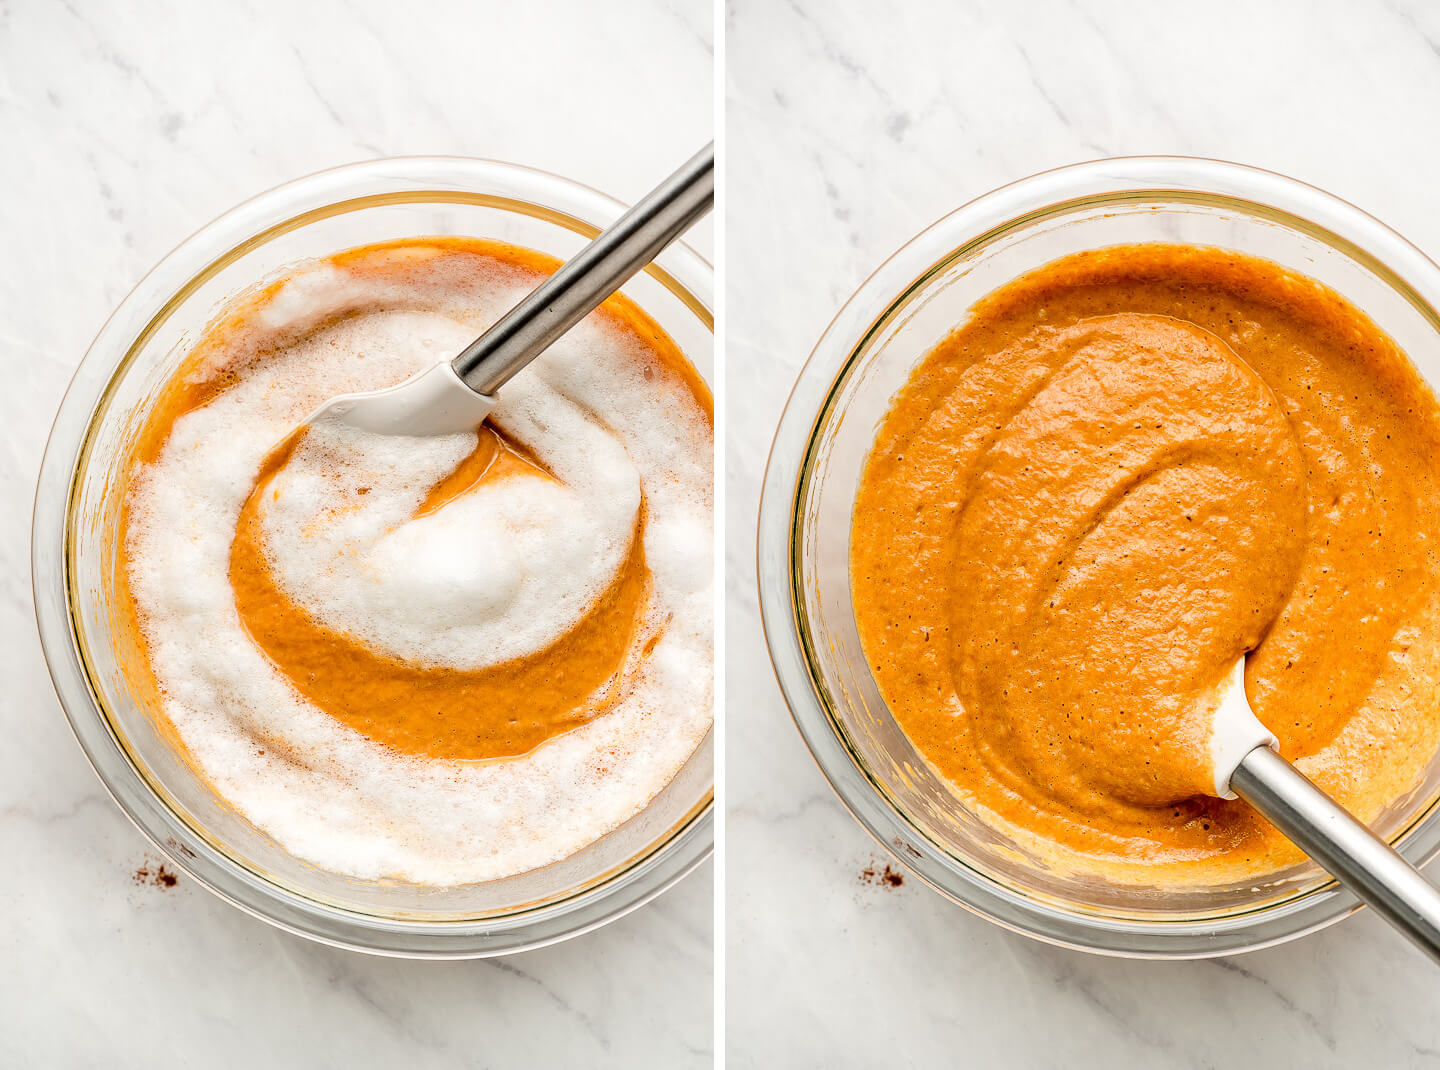 Diptych- Process of folding whipped egg whites into pumpkin batter.